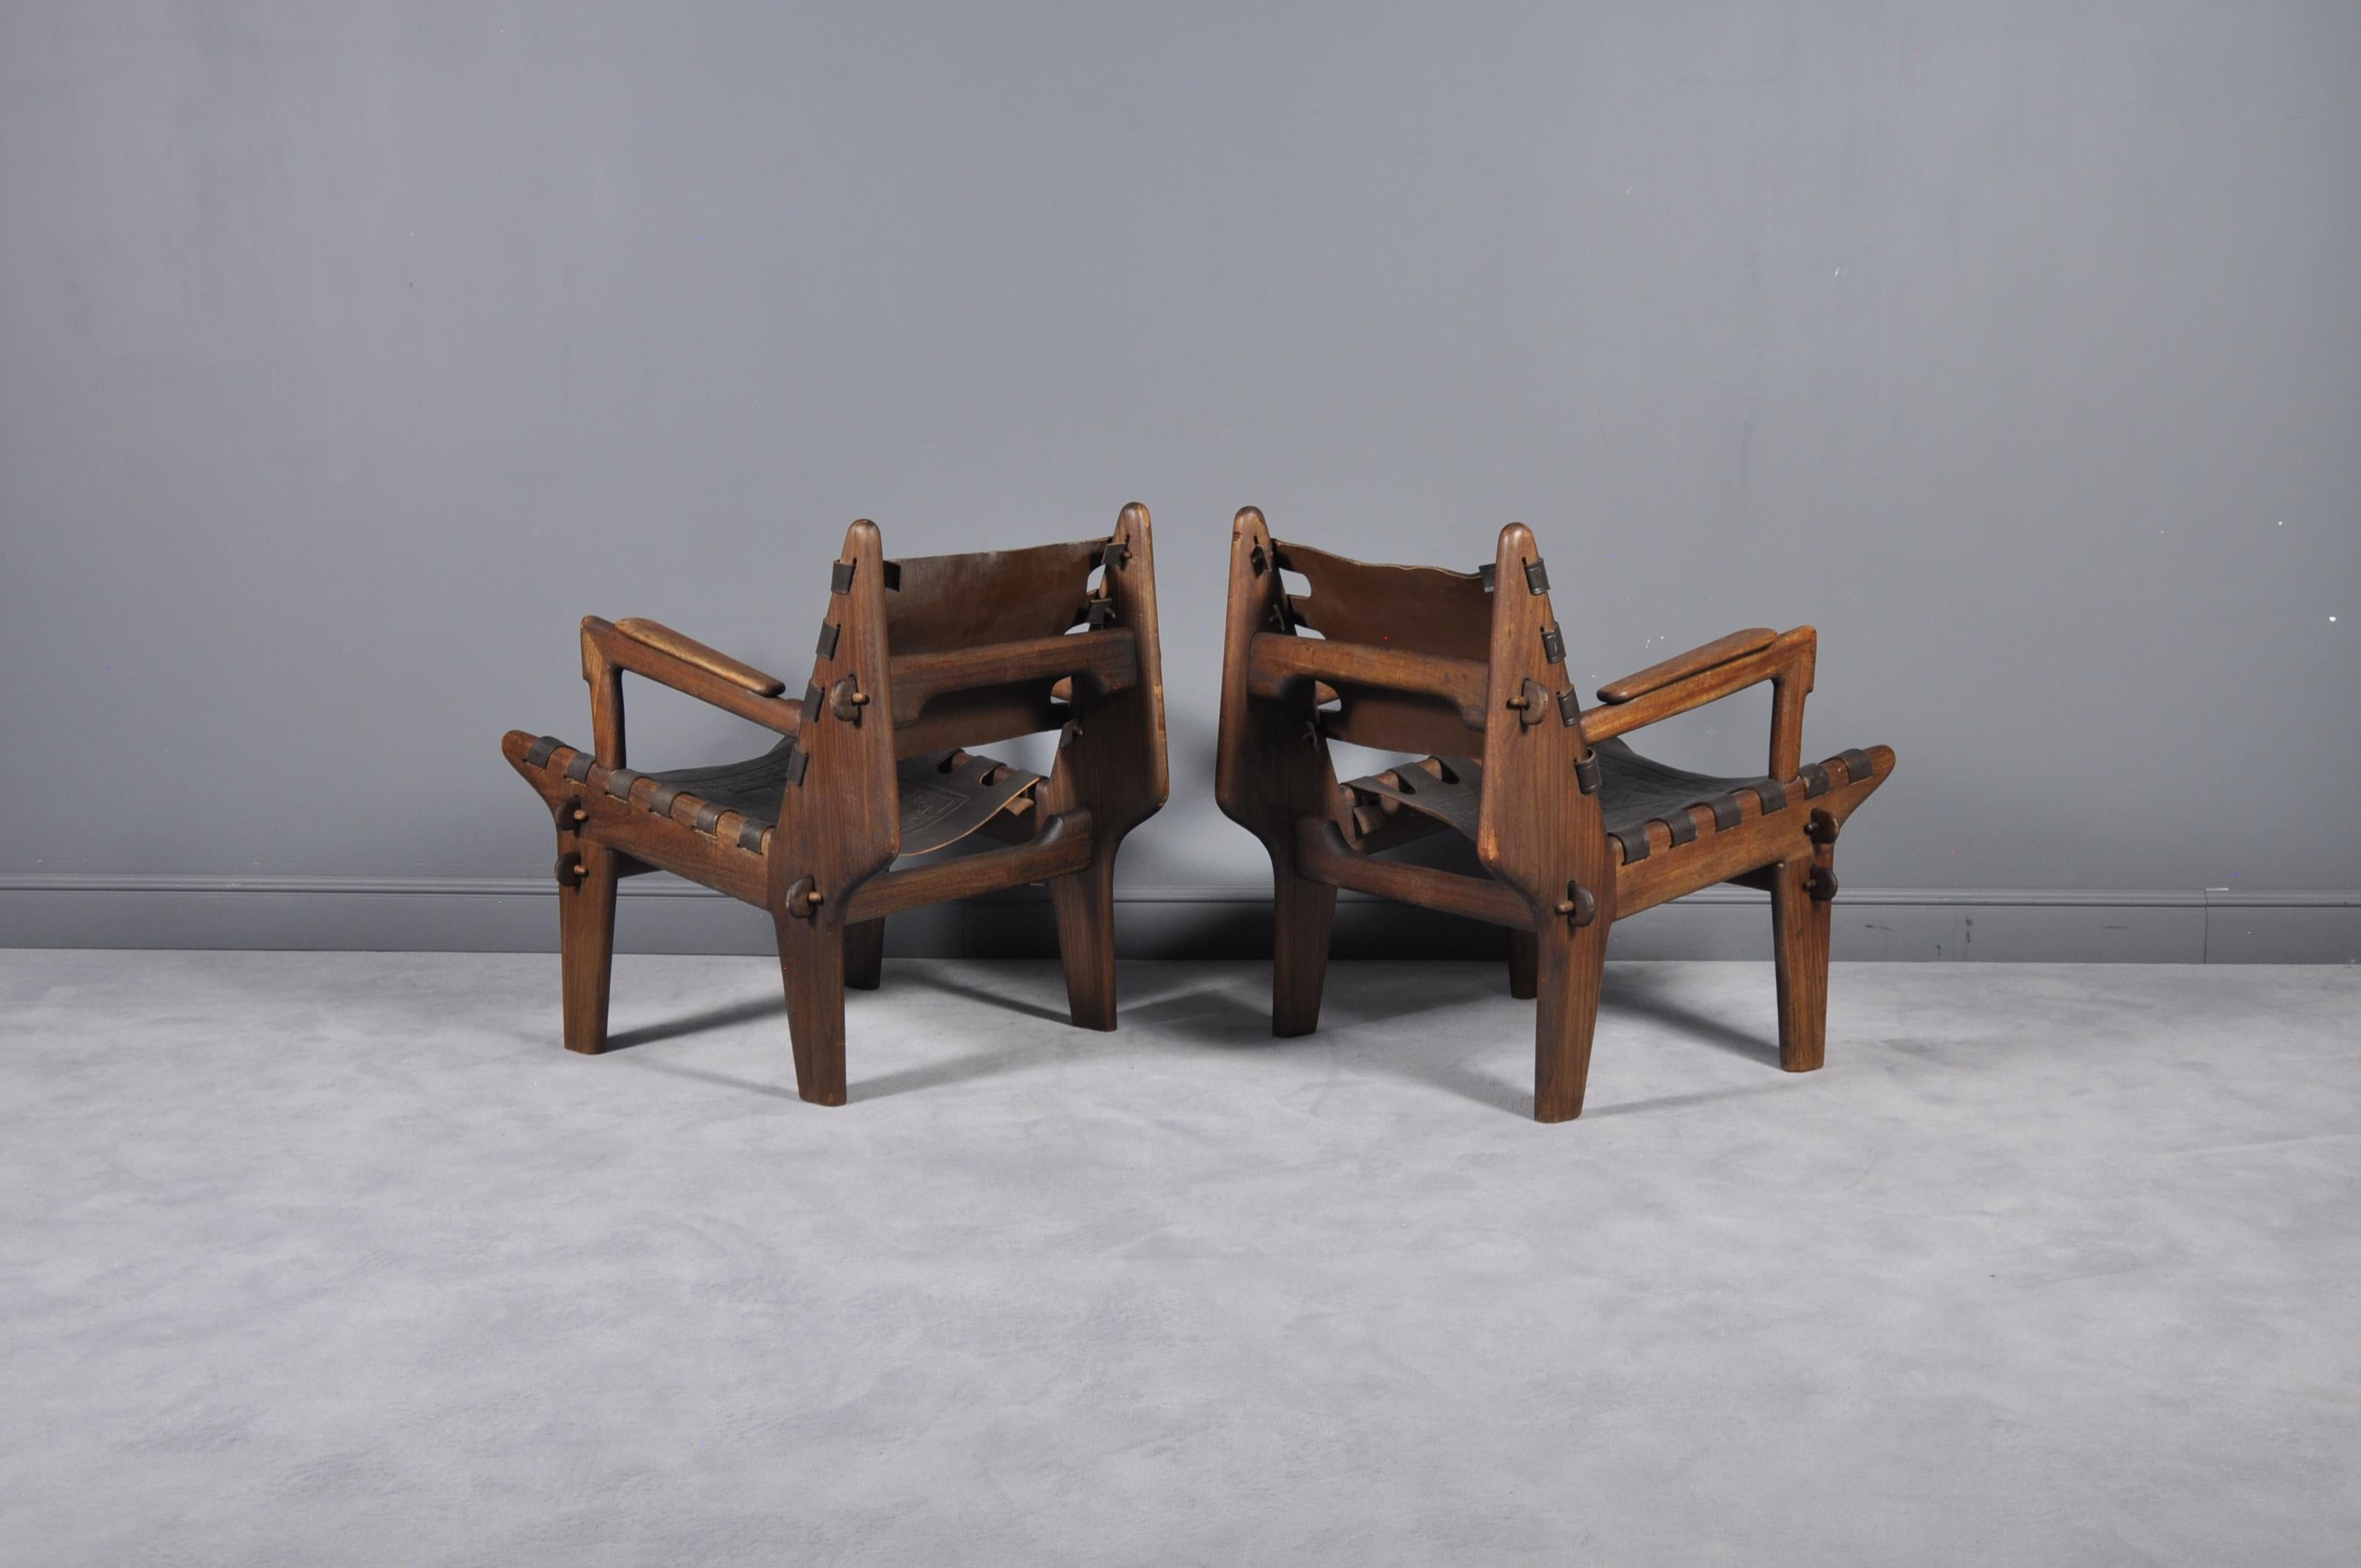 Pazmino’s design career was launched as the result of a Peace Corps/USAID joint venture that paired Scandinavian designers with local craftsmen in Latin America to encourage the production of furniture from local materials. This is a pair of lounge